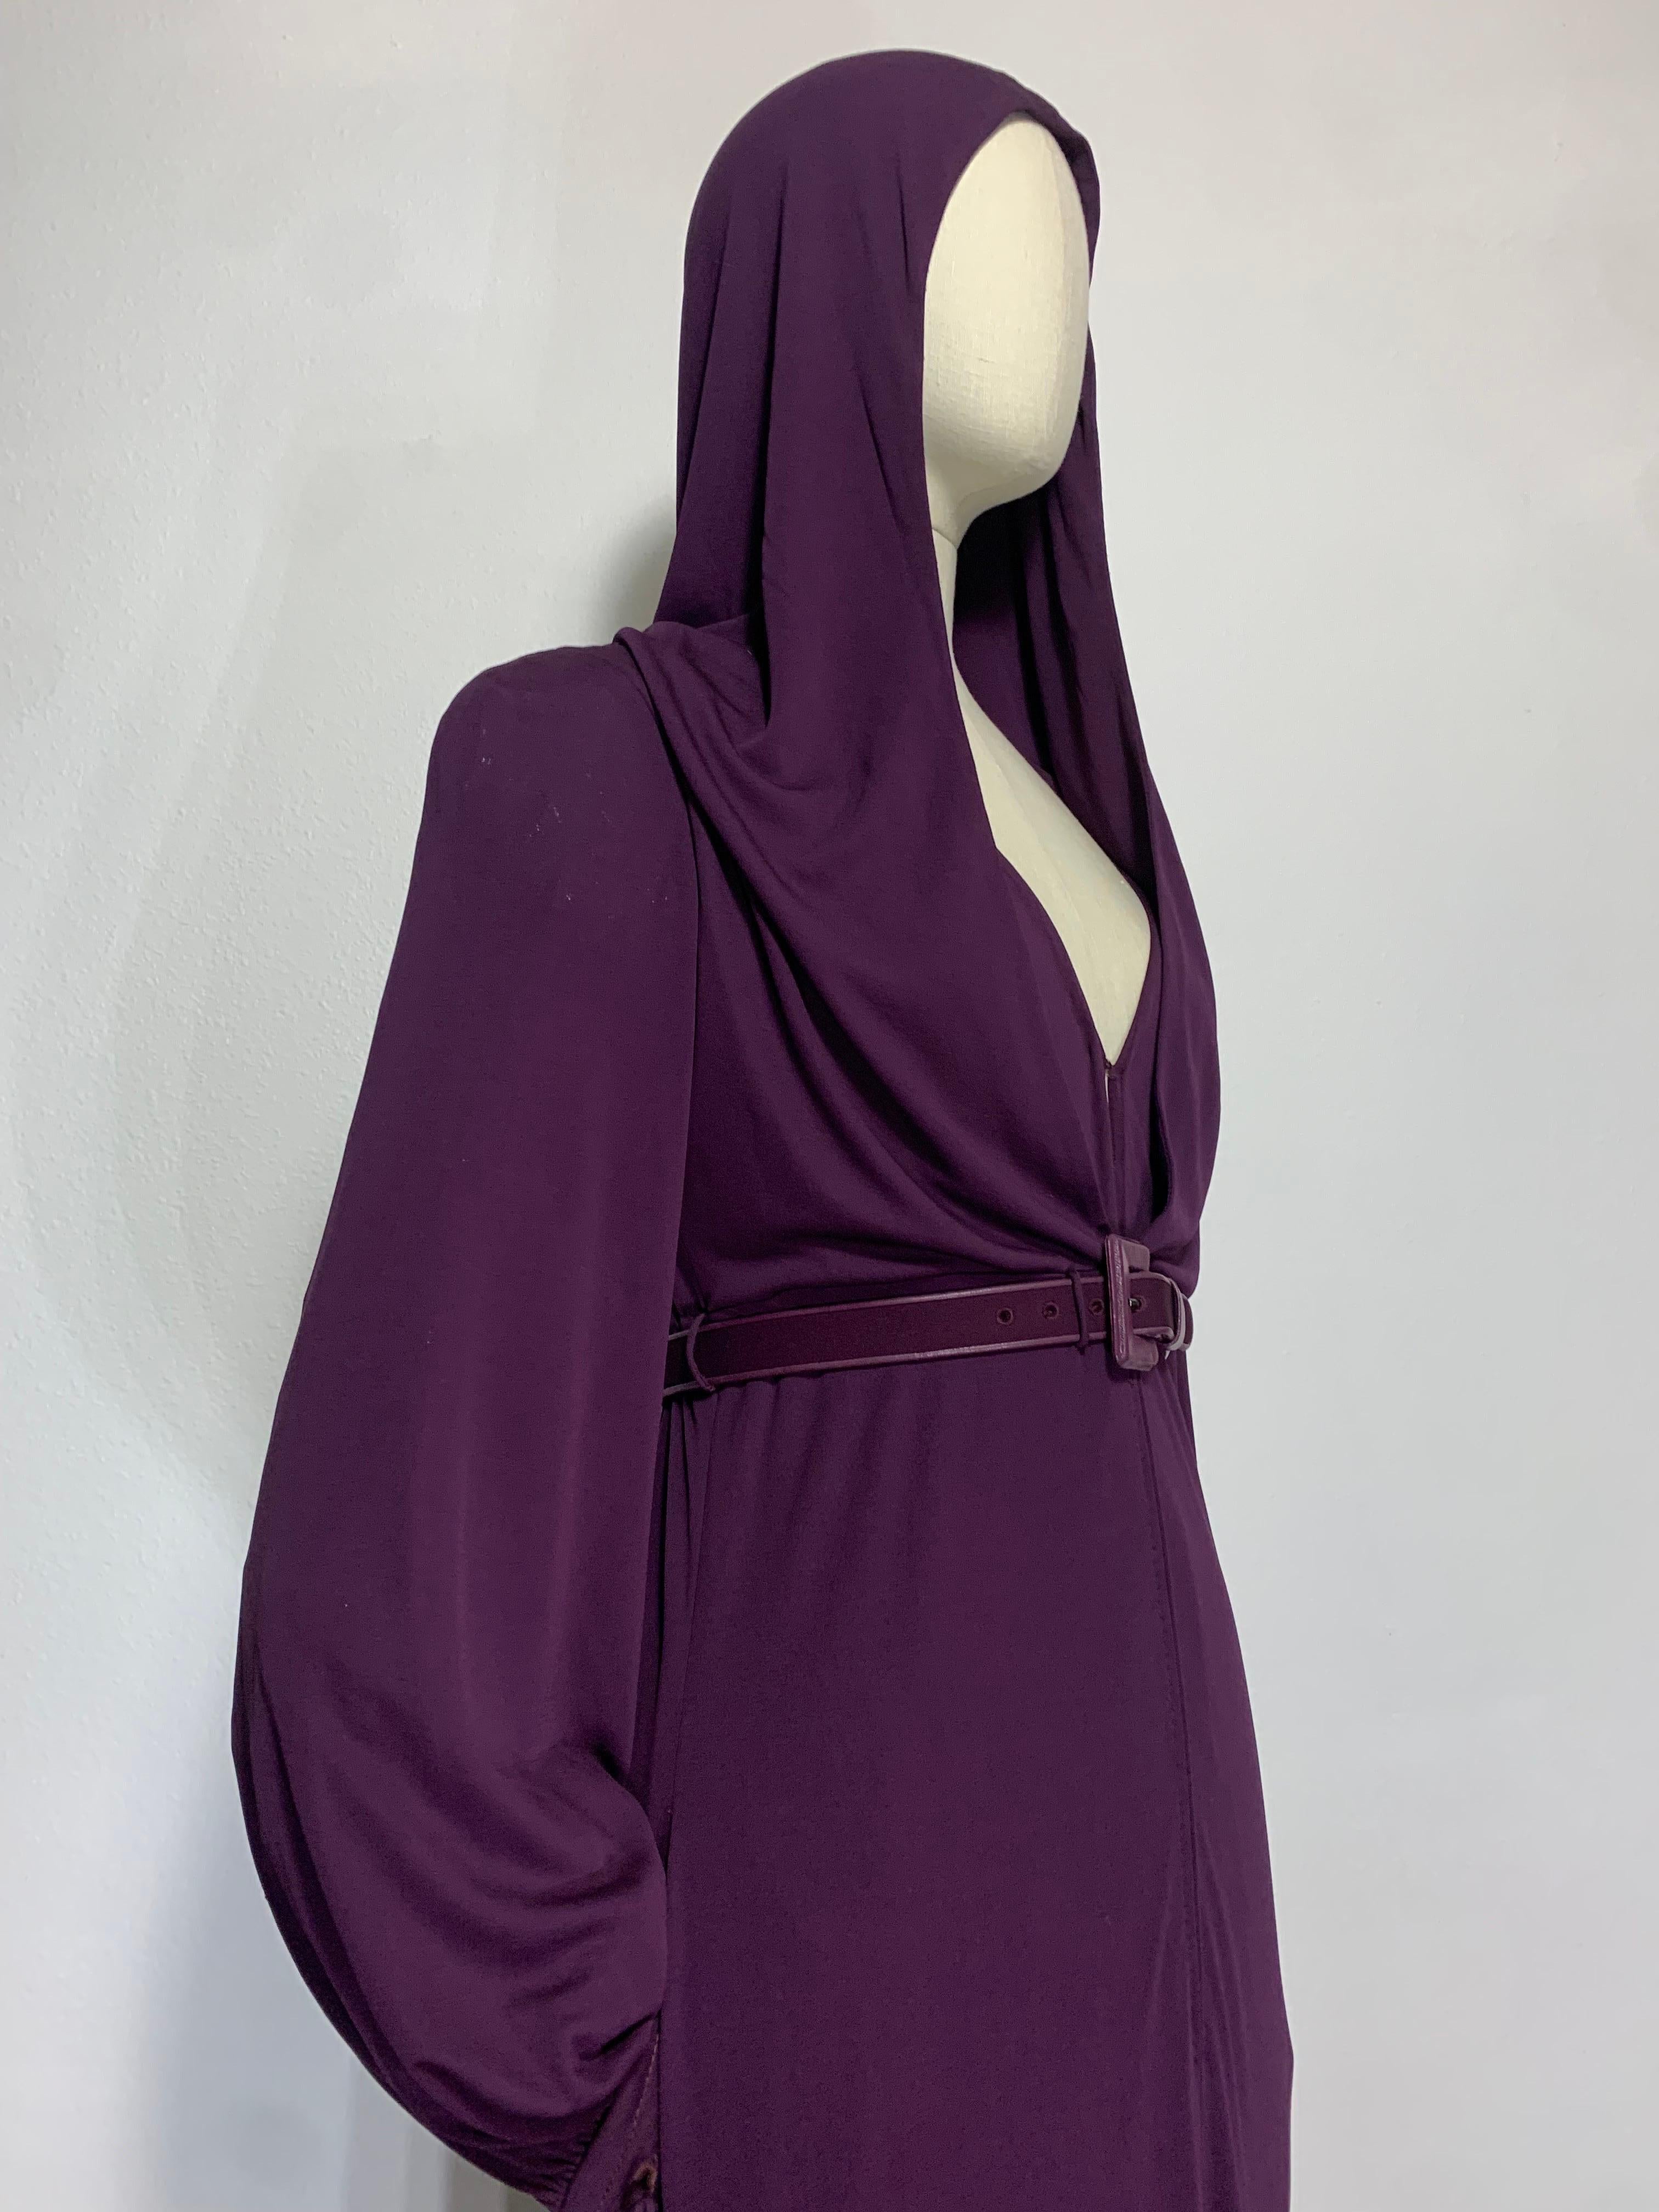 1975 James Galanos Dramatic Aubergine Jersey Maxi Gown w Fabulous Draped Hood For Sale 11